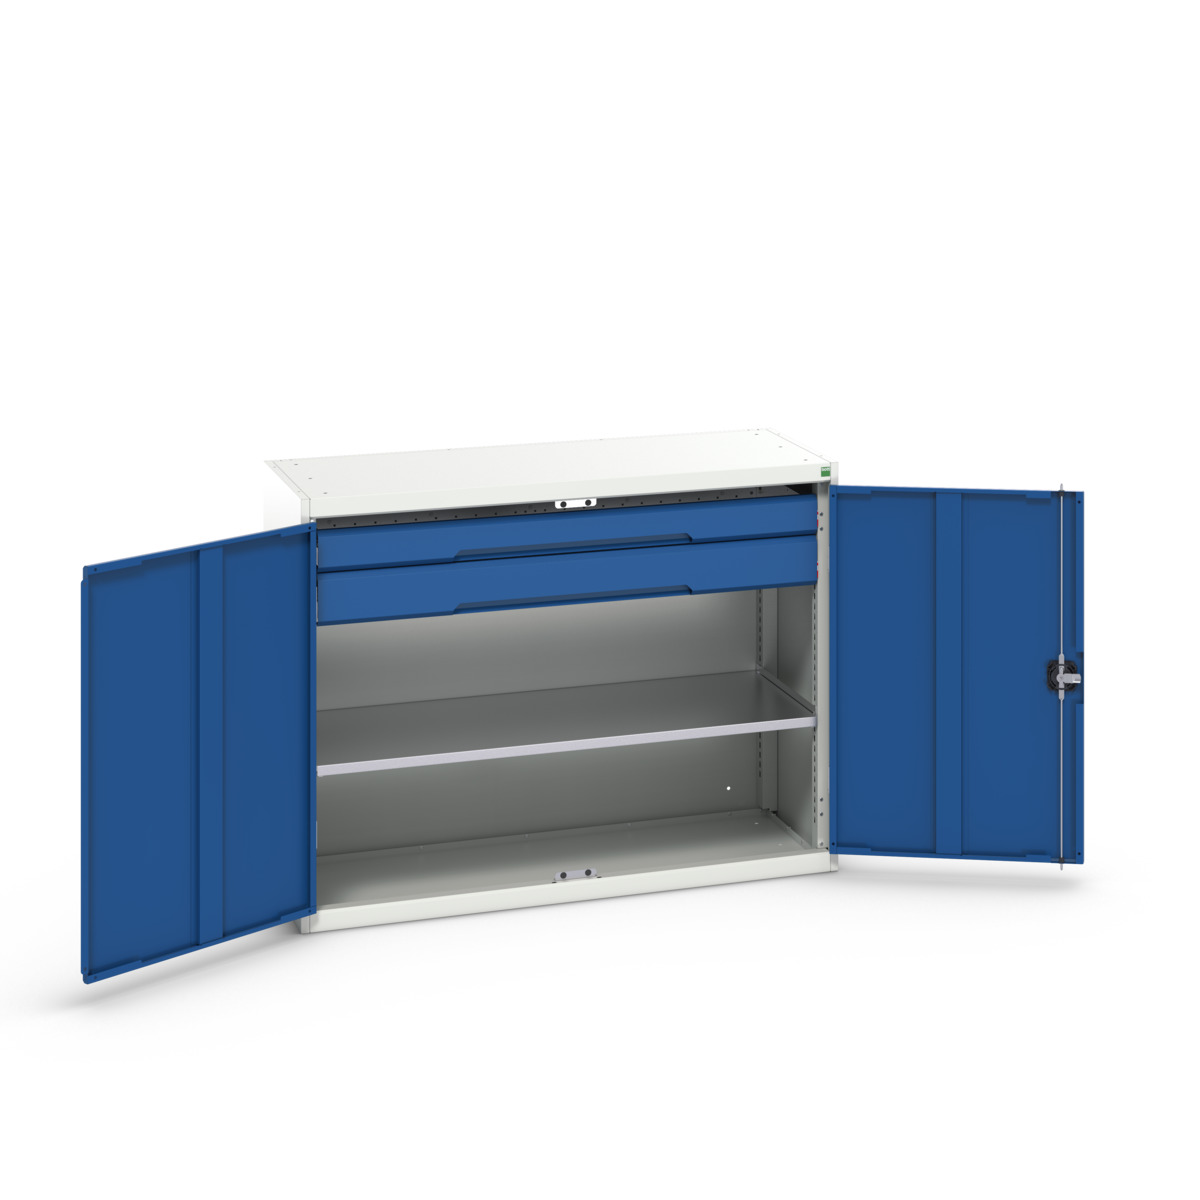 16926605.11 - verso kitted cupboard